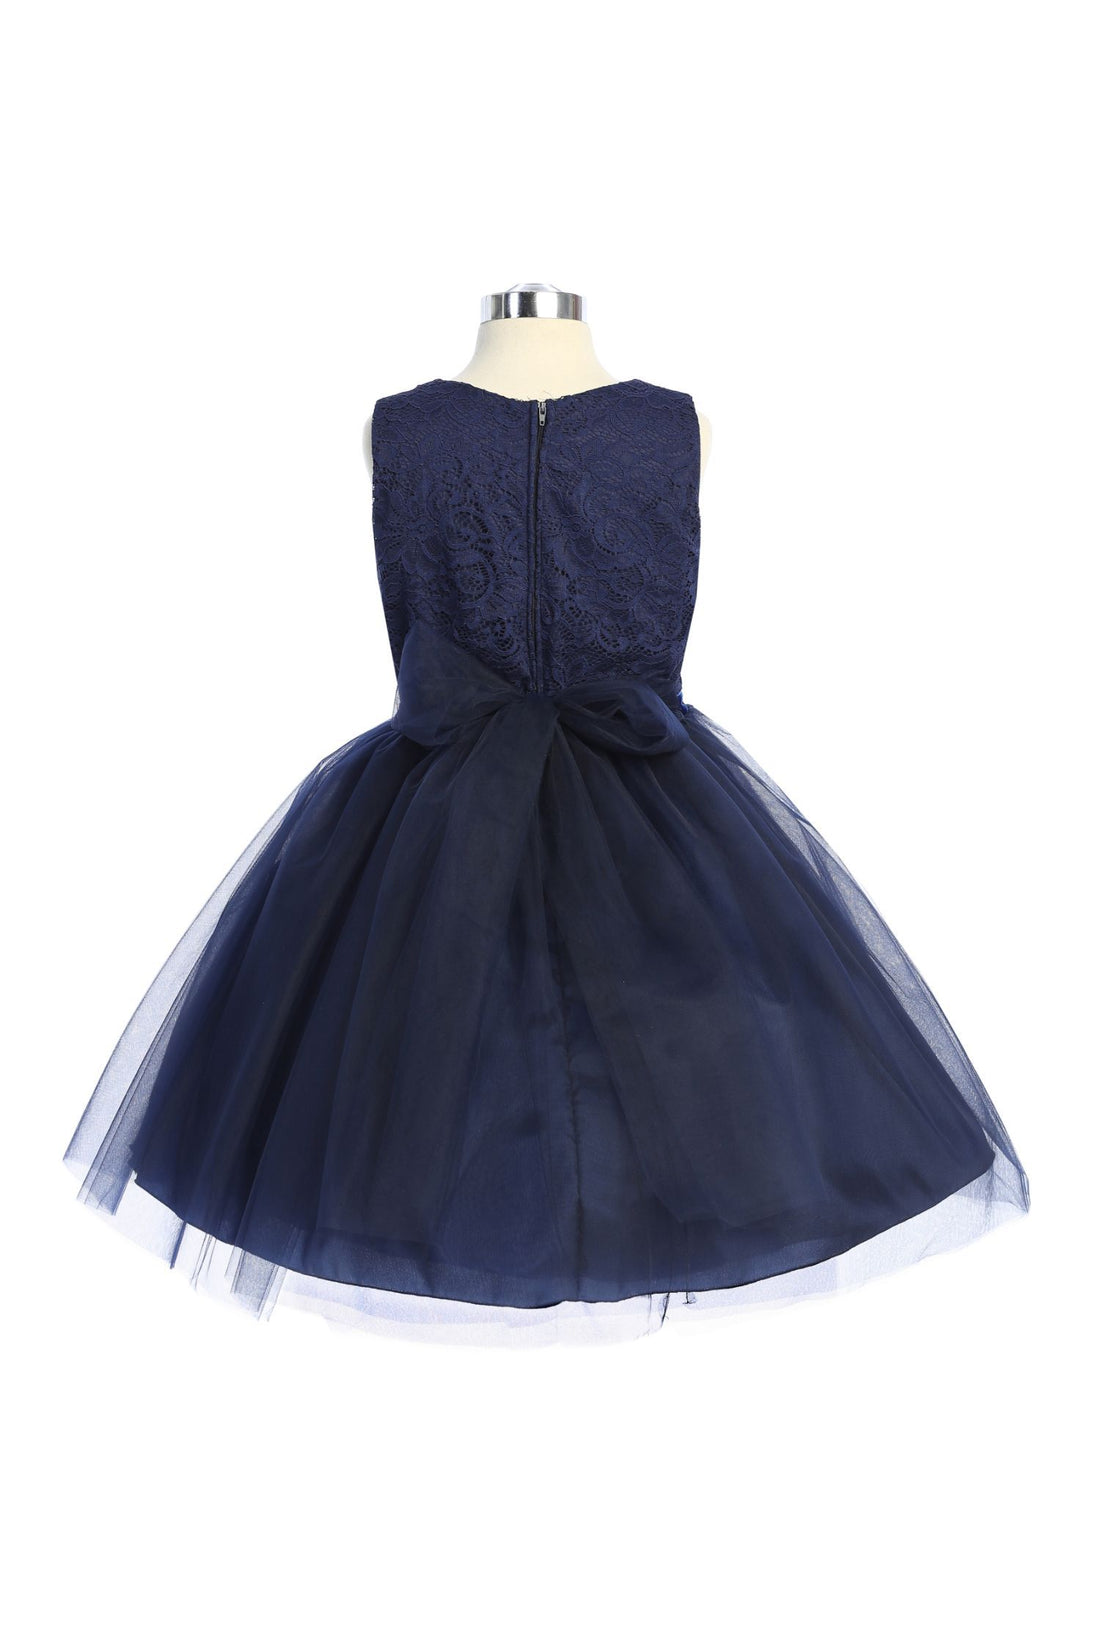 Stretch Lace Tulle Velvet Trim Girl Party Dress Plus Size by AS528+ Kids Dream - Girl Formal Dresses